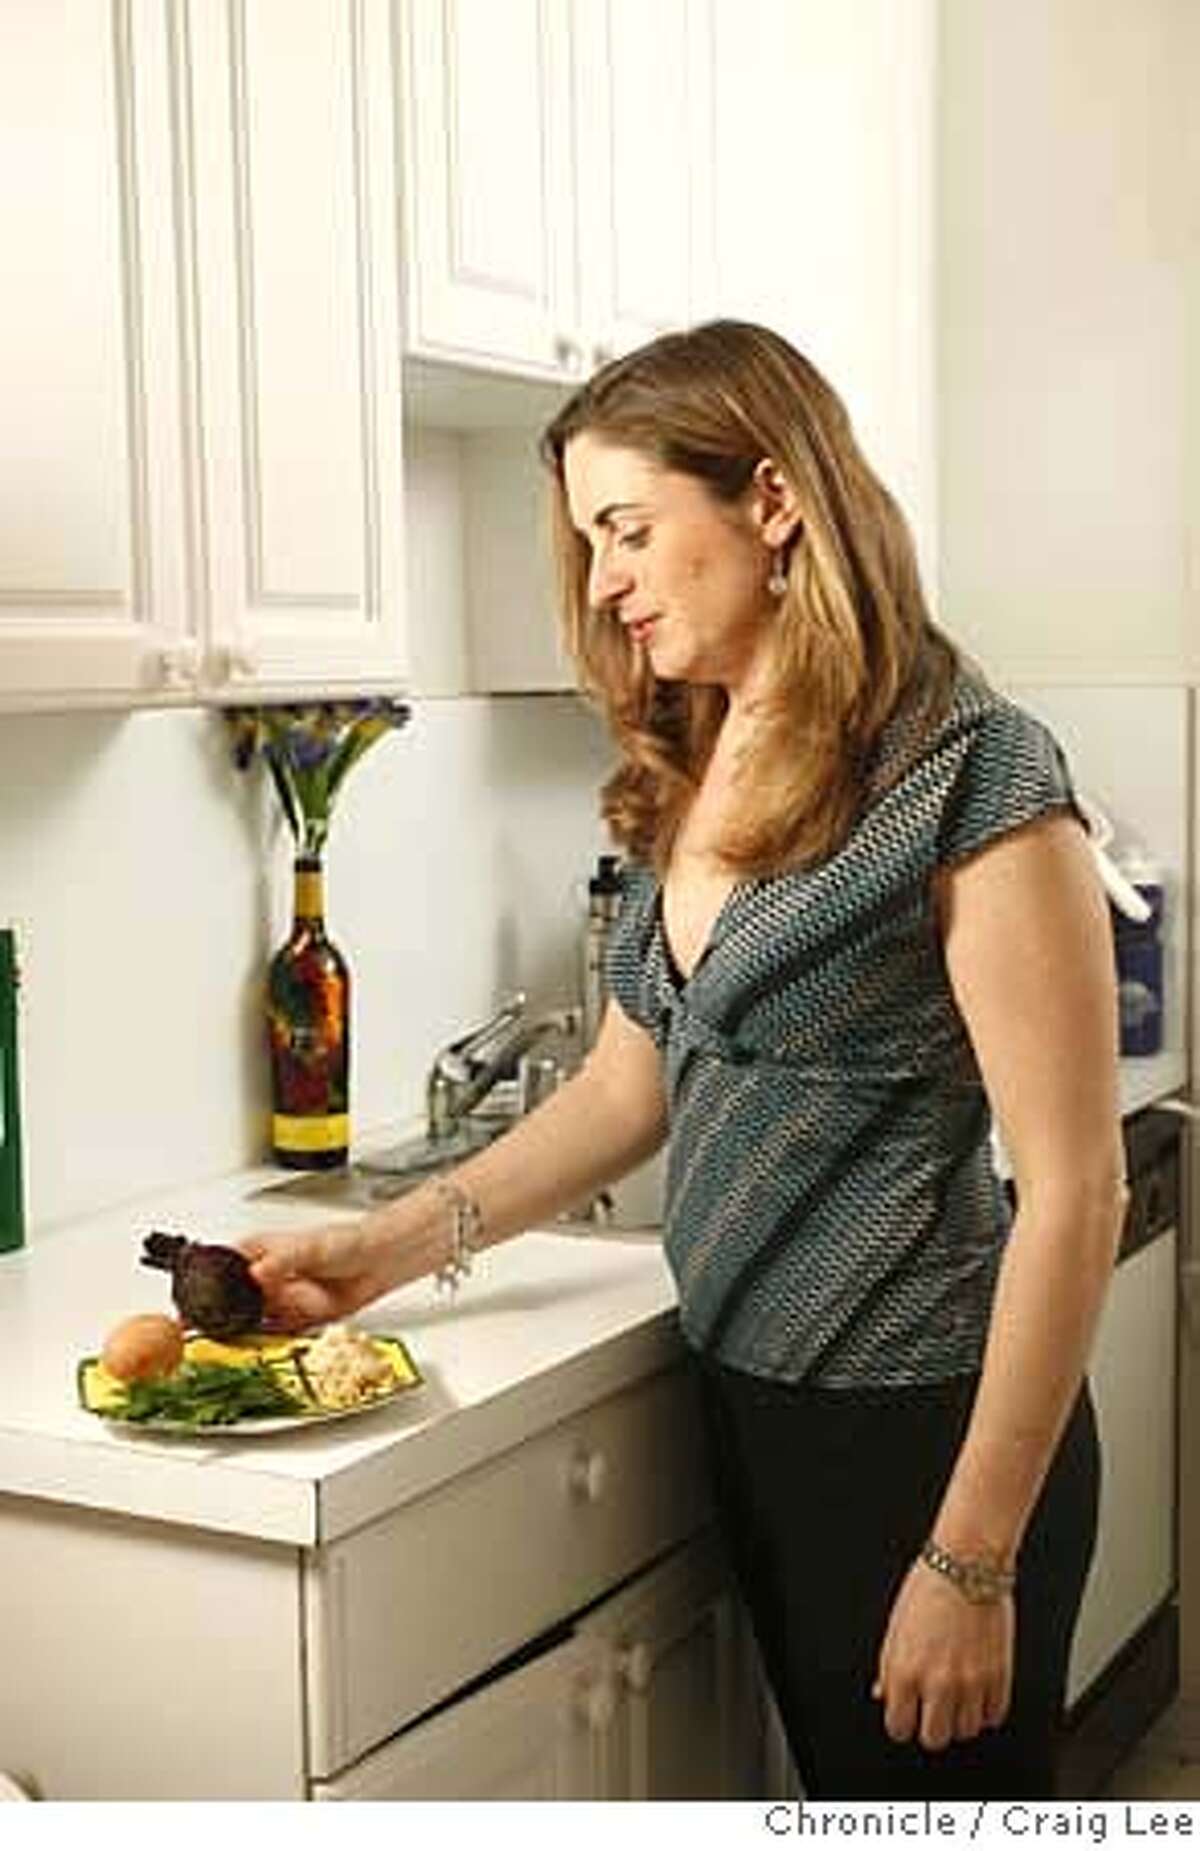 ###Live Caption:Rachelle Diamond, setting up her ritual Seder plate for Passover. She is a vegetarian, so she substitutes roasted beets for the lamb shankbone. Craig Lee / The Chronicle###Caption History:Rachelle Diamond, setting up her ritual Seder plate for Passover. She is a vegetarian, so she substitutes roasted beets for the lamb shankbone. Craig Lee / The Chronicle###Notes:Rachelle Diamond 415-606-5889 (cell) or 415-441-5889 Craig Lee 415-218-8597 clee@sfchronicle.com###Special Instructions:MANDATORY CREDIT FOR PHOTOG AND SF CHRONICLE/NO SALES-MAGS OUT